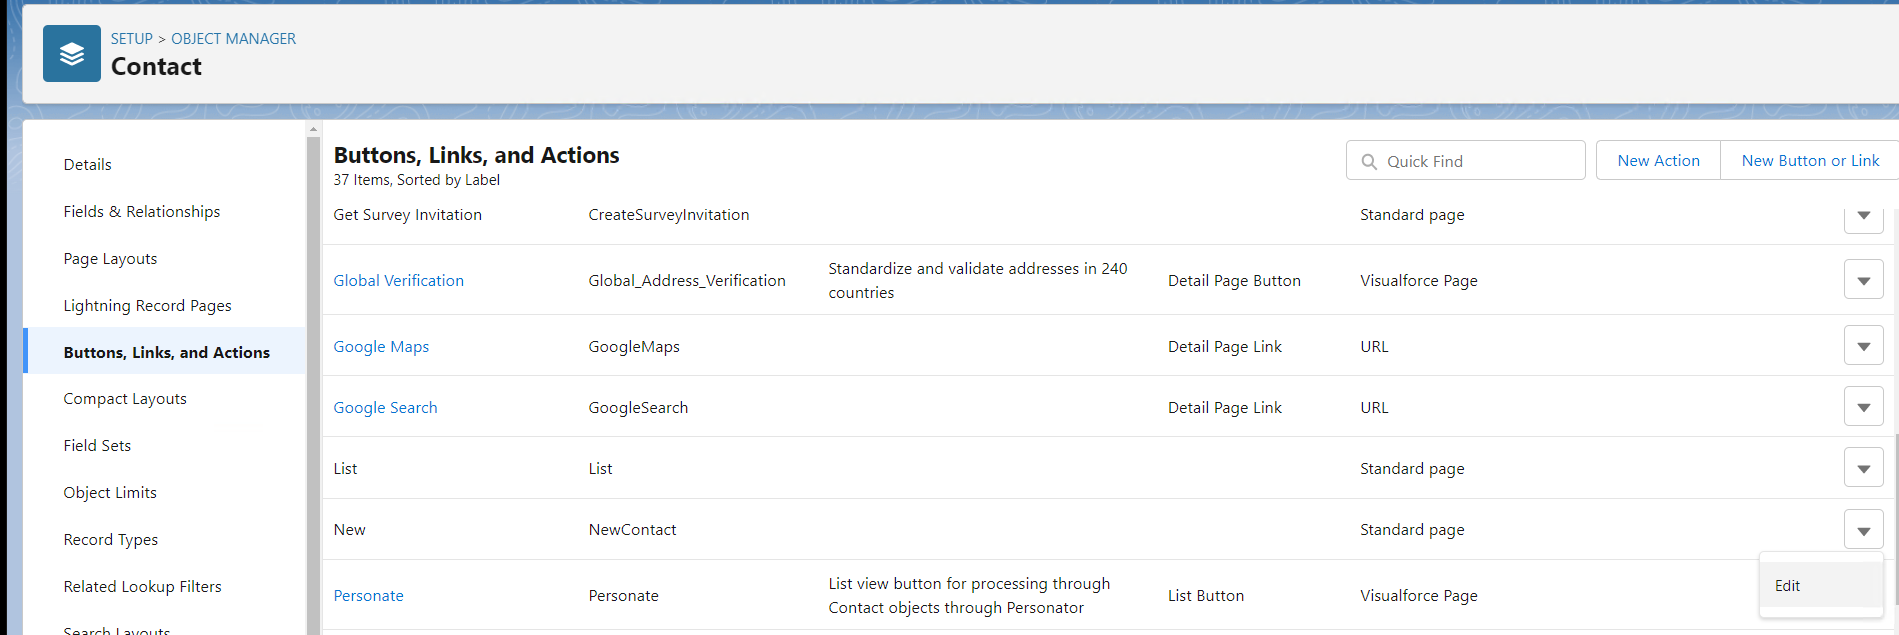 Salesforce Express Entry Contact Lightning Override Instructions - 05 - Edit "NEW" Action - Melissa Wiki